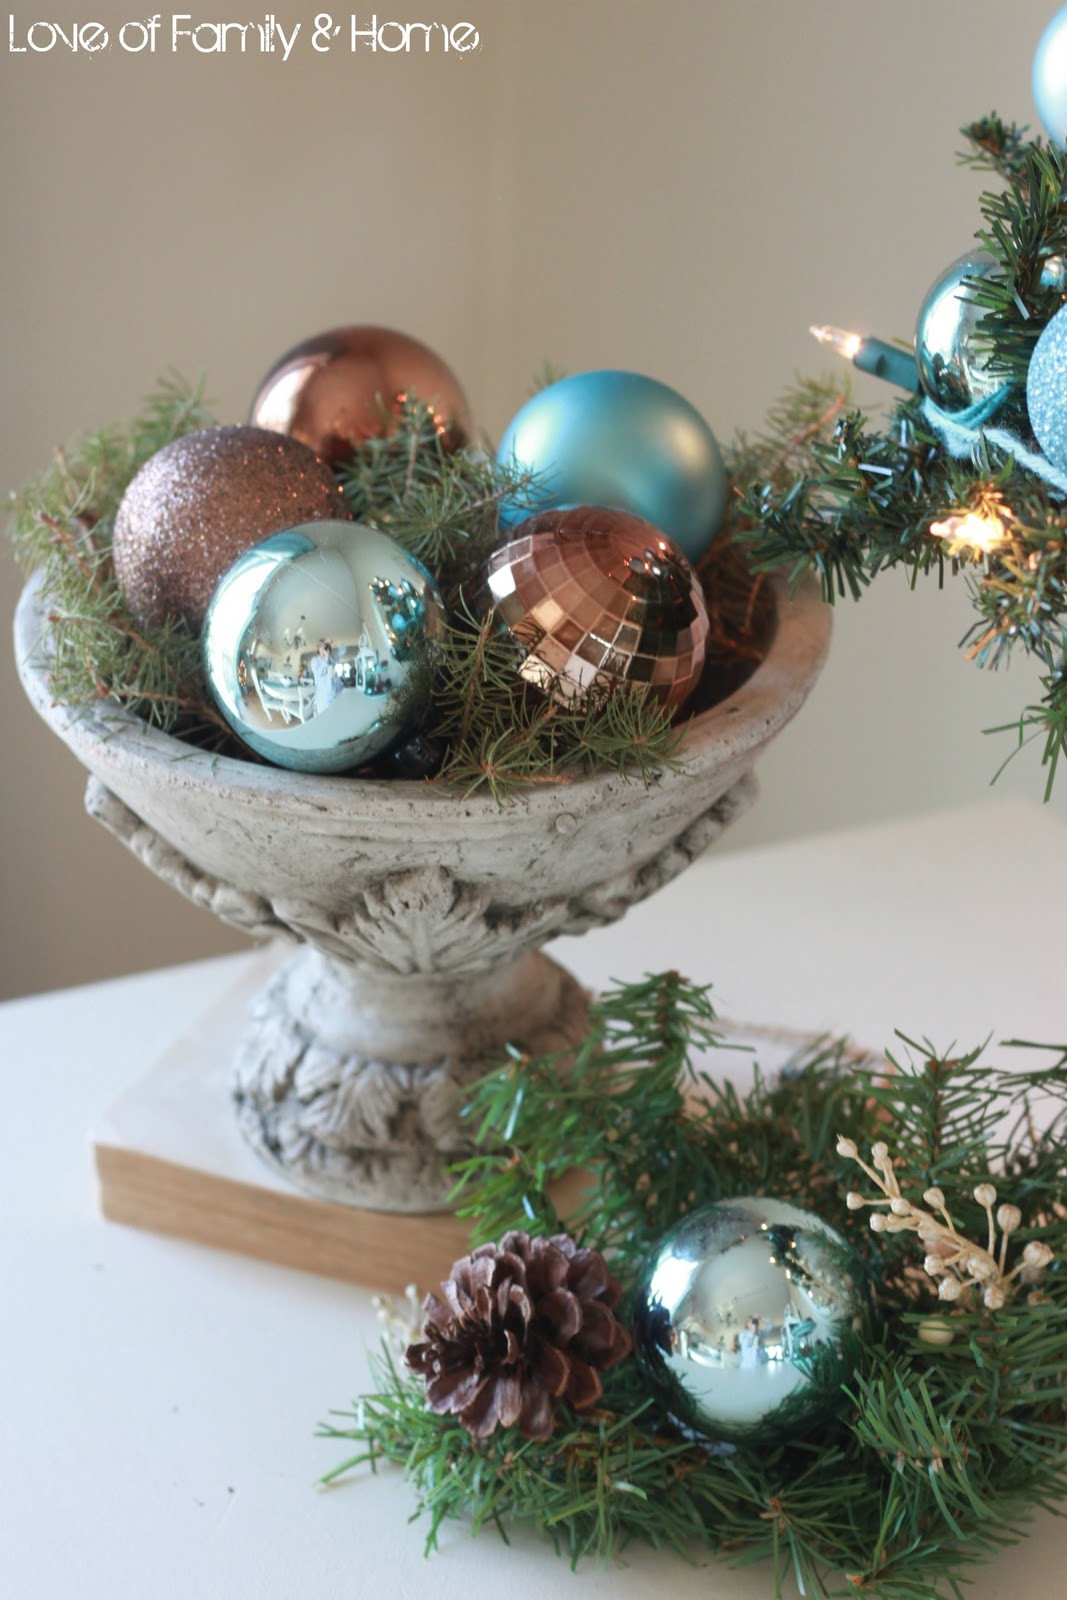 Blue Christmas Decor
 My Christmas Kitchen 2011 & Giveaway Winner Love of